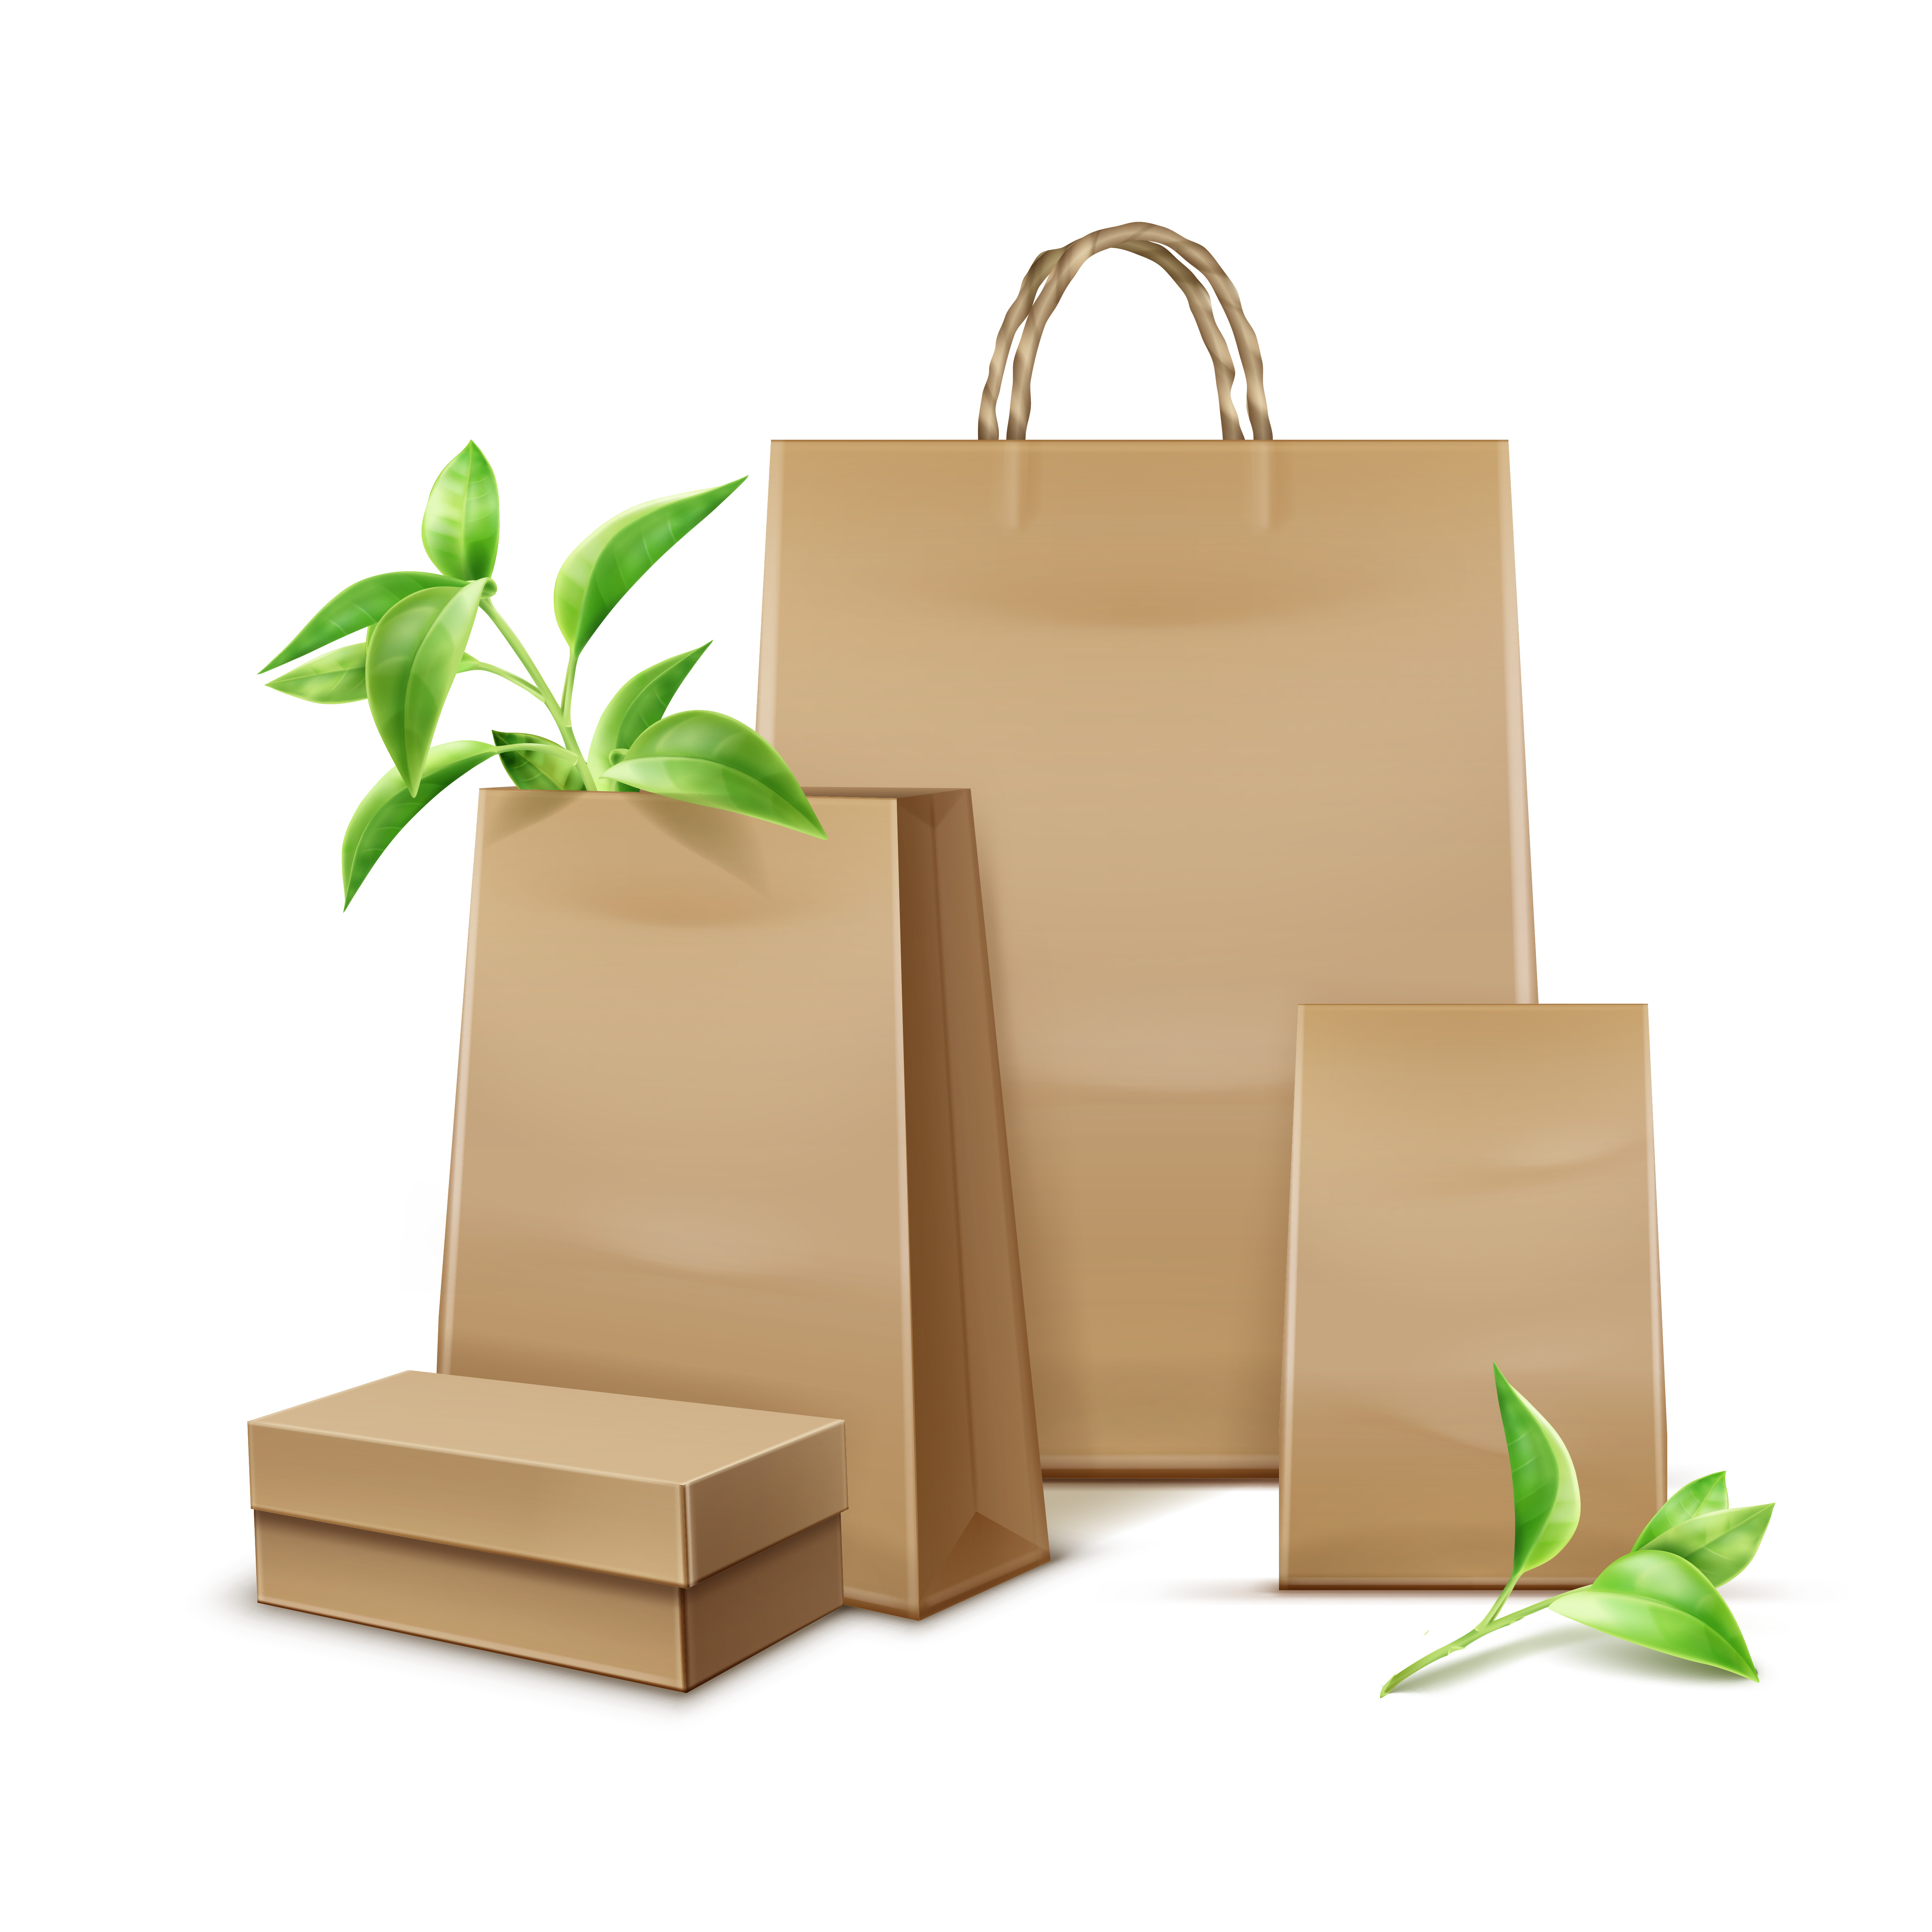 In Response to Earth Month, Advocate Green Packaging